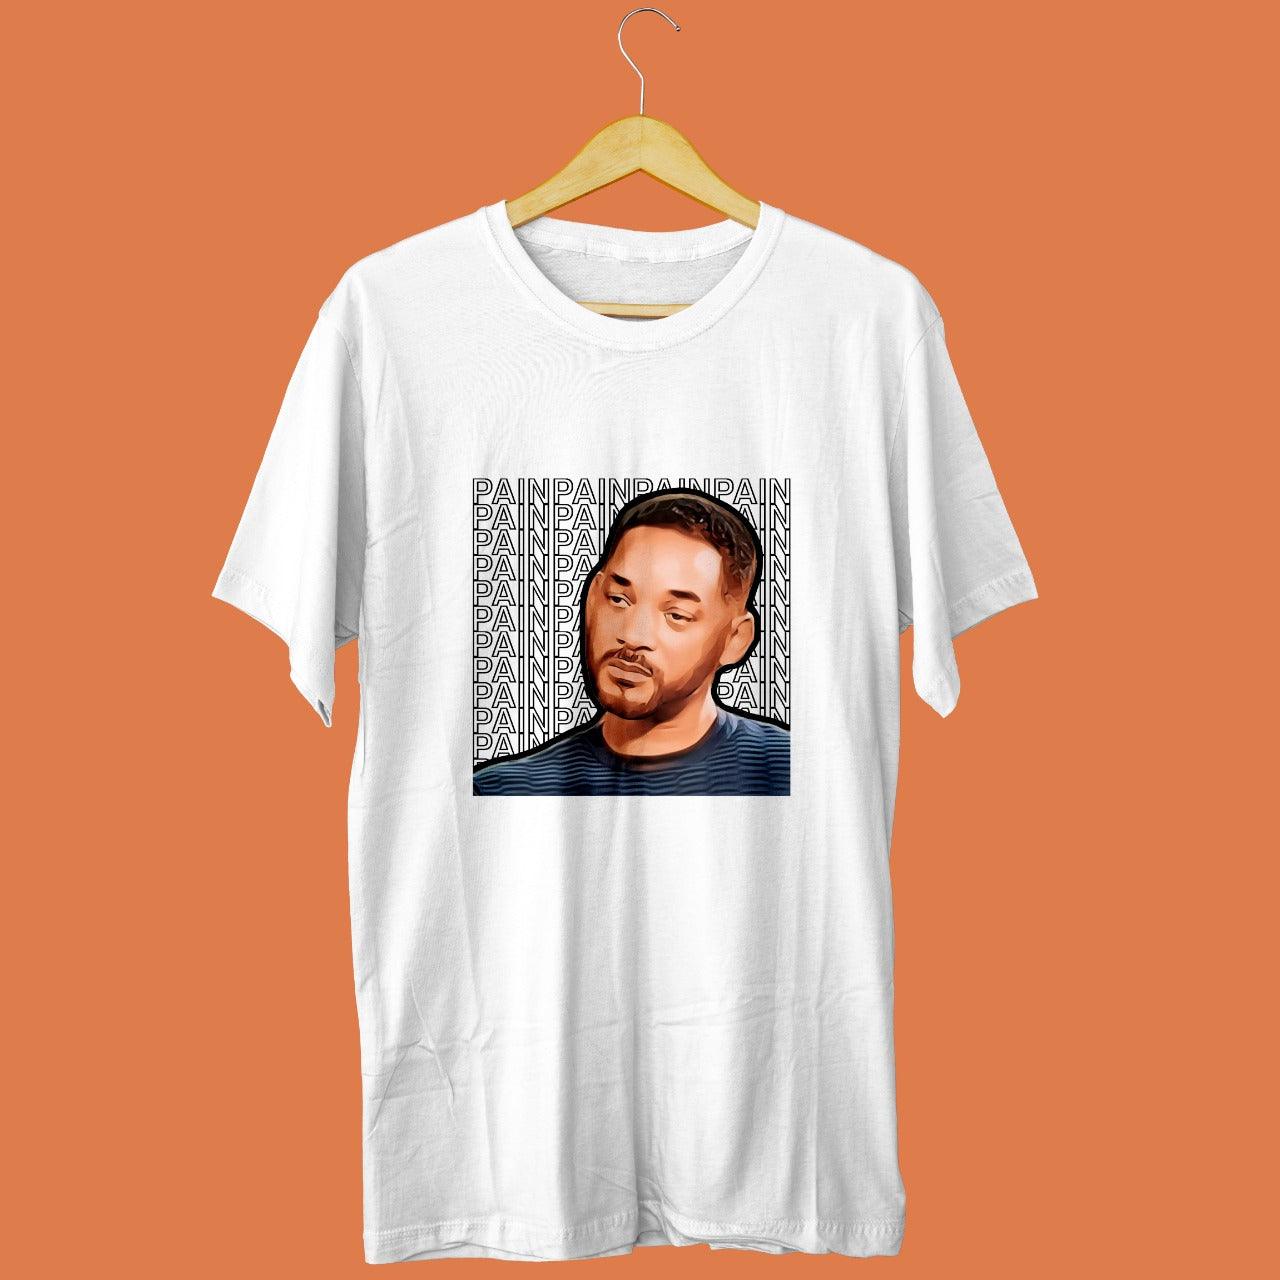 white tshirt with picture of sad will smith printed on it with pain written multiple times in the background, relatable memes